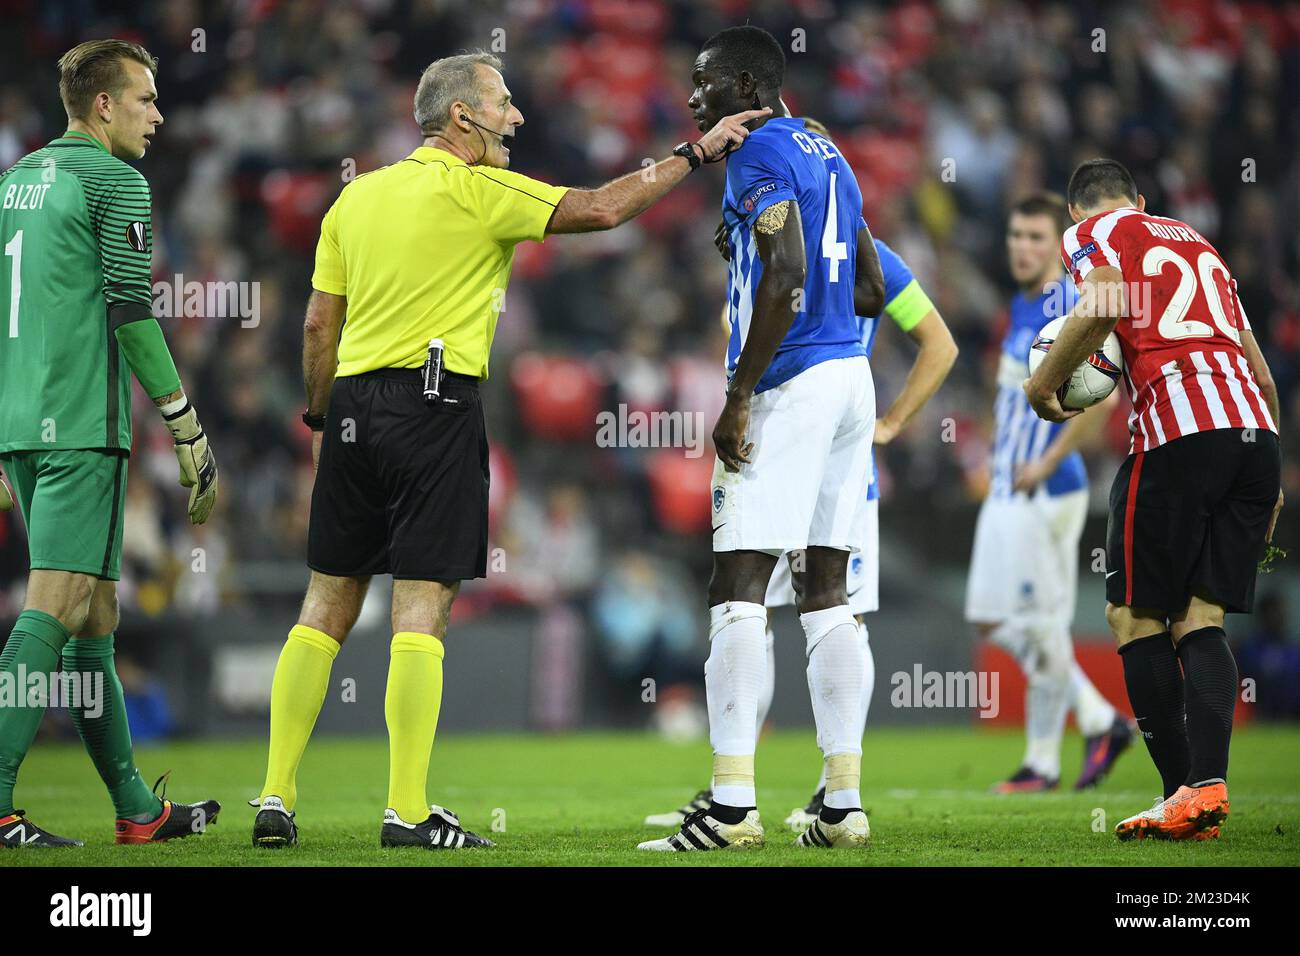 Genk's goalkeeper Marco Bizot, Referee Martin Atkinson, Genk's Omar Colley and Athletic's forward Aritz Aduriz pictured during a soccer game between Spanish Club Athletic Bilbao and Belgian team KRC Genk in Bilbao, Spain, Thursday 03 November 2016, the fourth game of the group stage of the Europa League competition in Group F. BELGA PHOTO YORICK JANSENS Stock Photo